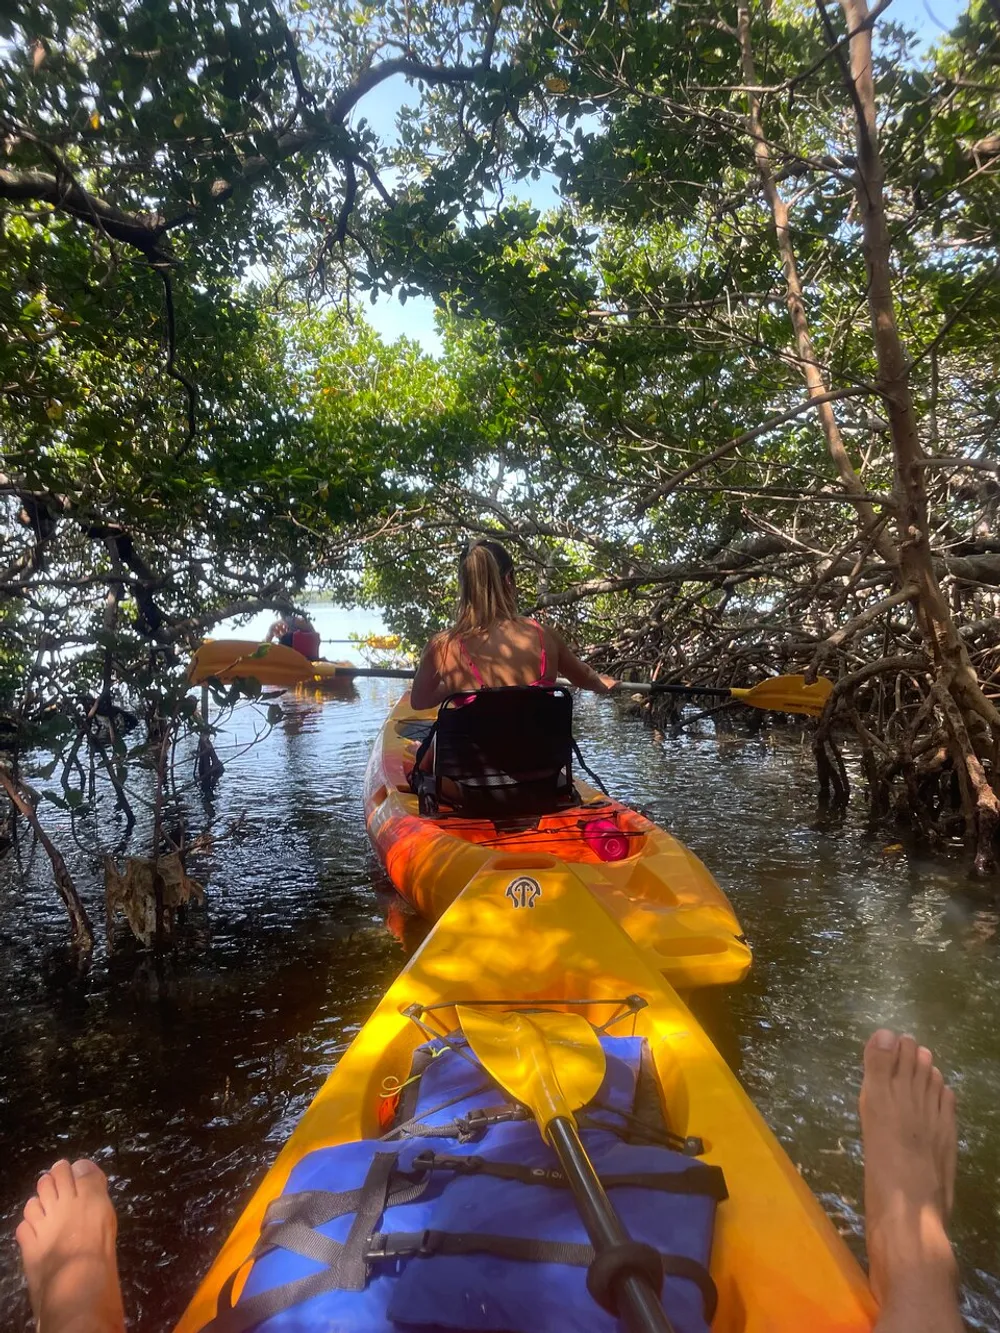 A person kayaking through a mangrove forest with other kayakers ahead and a view of the paddlers legs extending towards the bow of the kayak